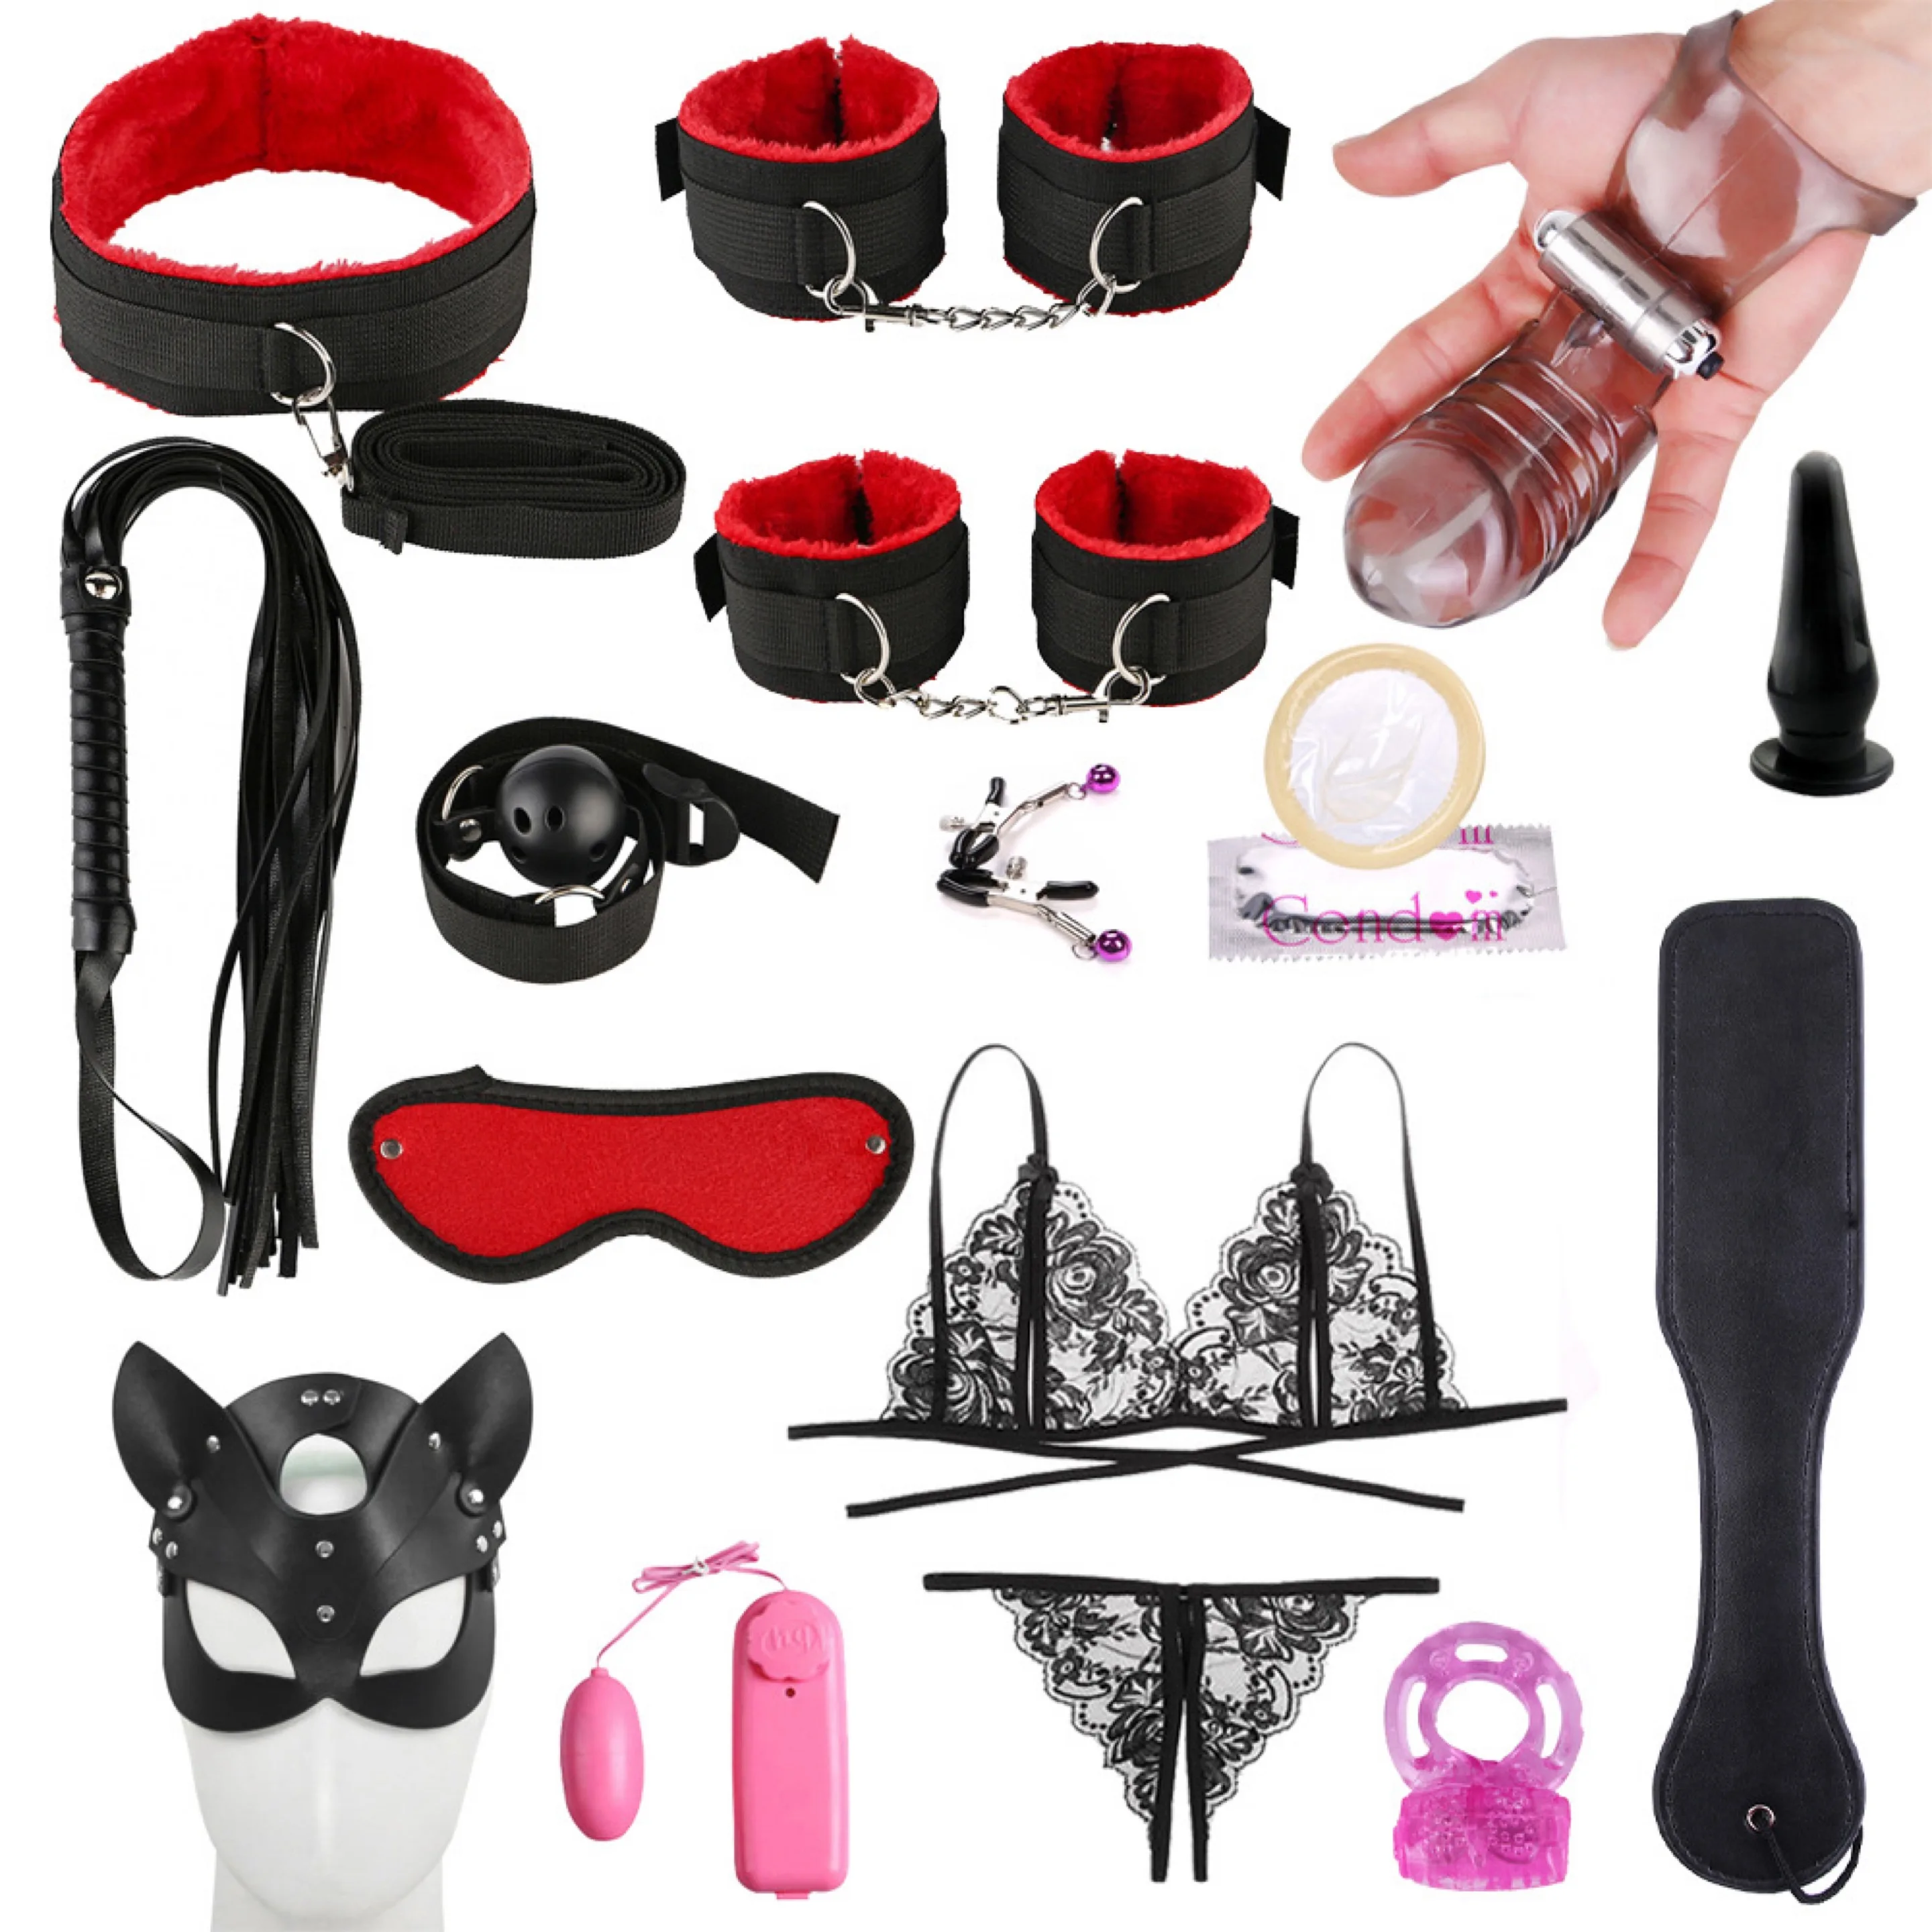 Wholesale 16pcs set Sex Toys Bondage gear sex toys for woman Handcuffs Whip anal plug husband and wife toys vibrators fetish sm Products From m.alibaba picture image